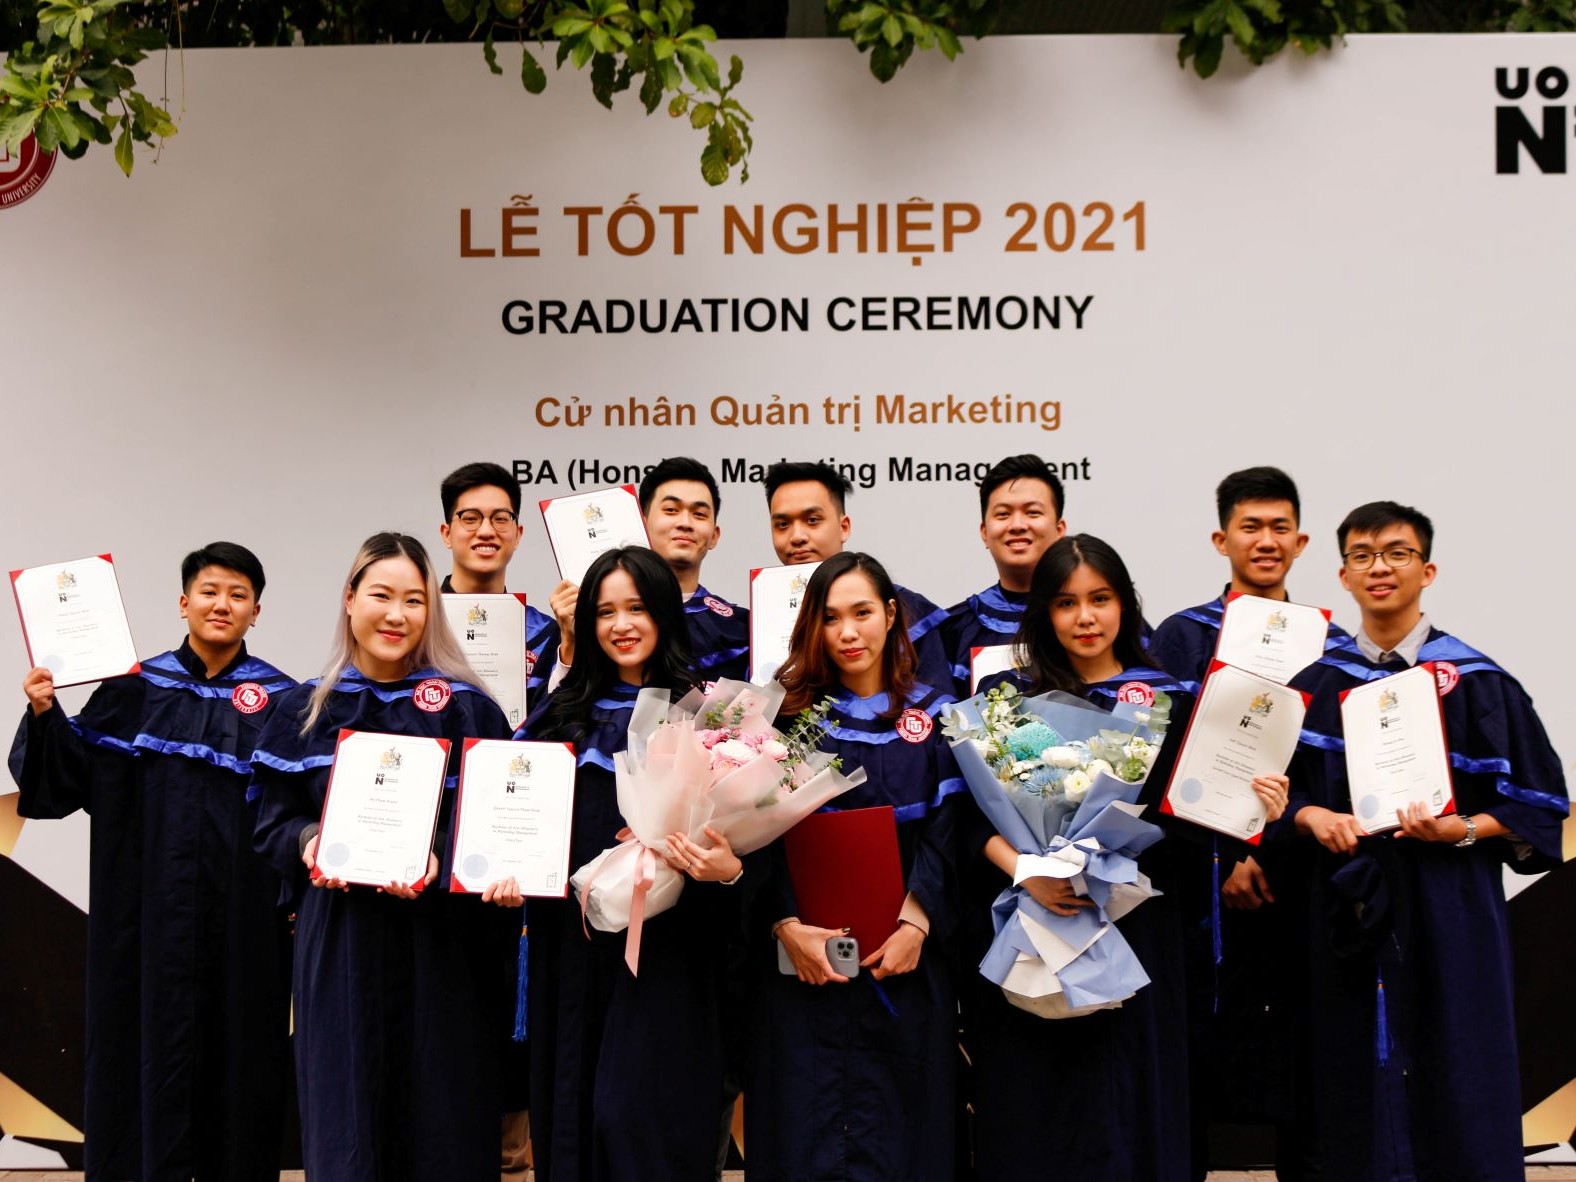 GRADUATION CEREMONY OF INTERNATIONAL JOINT-TRAINING BACHELOR AND MASTER PROGRAMS 2021